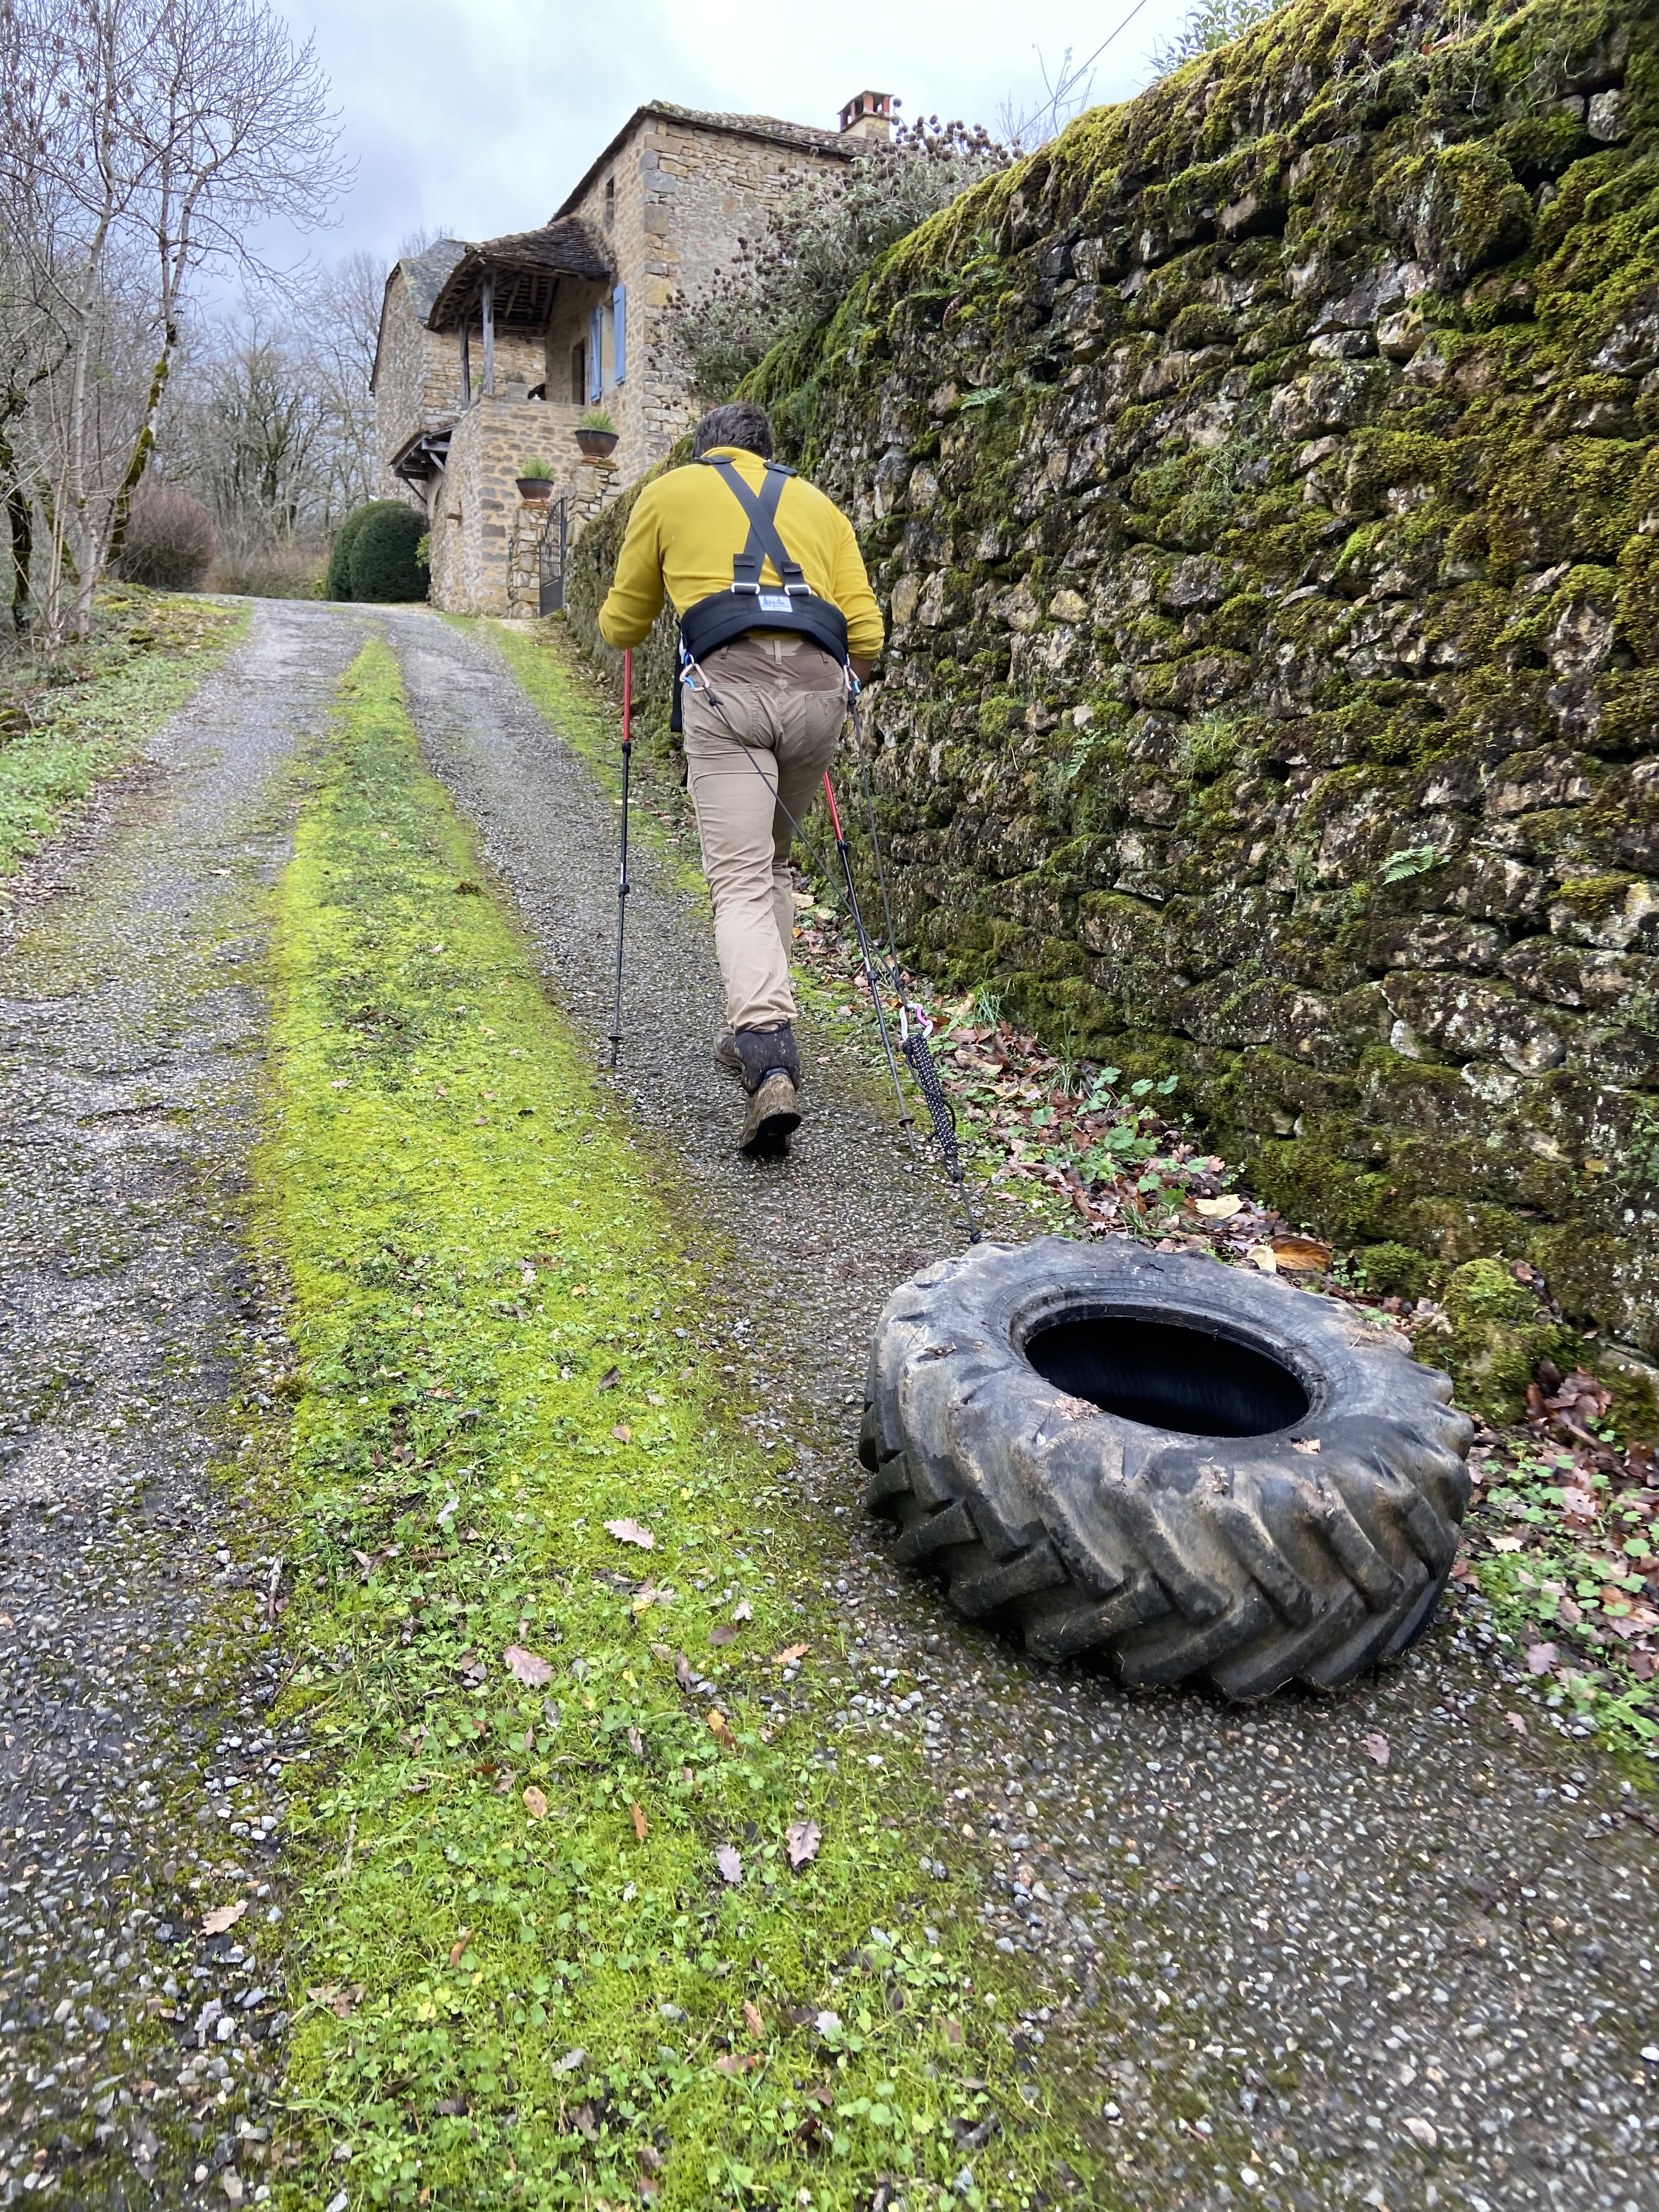 Tyre pulling in France